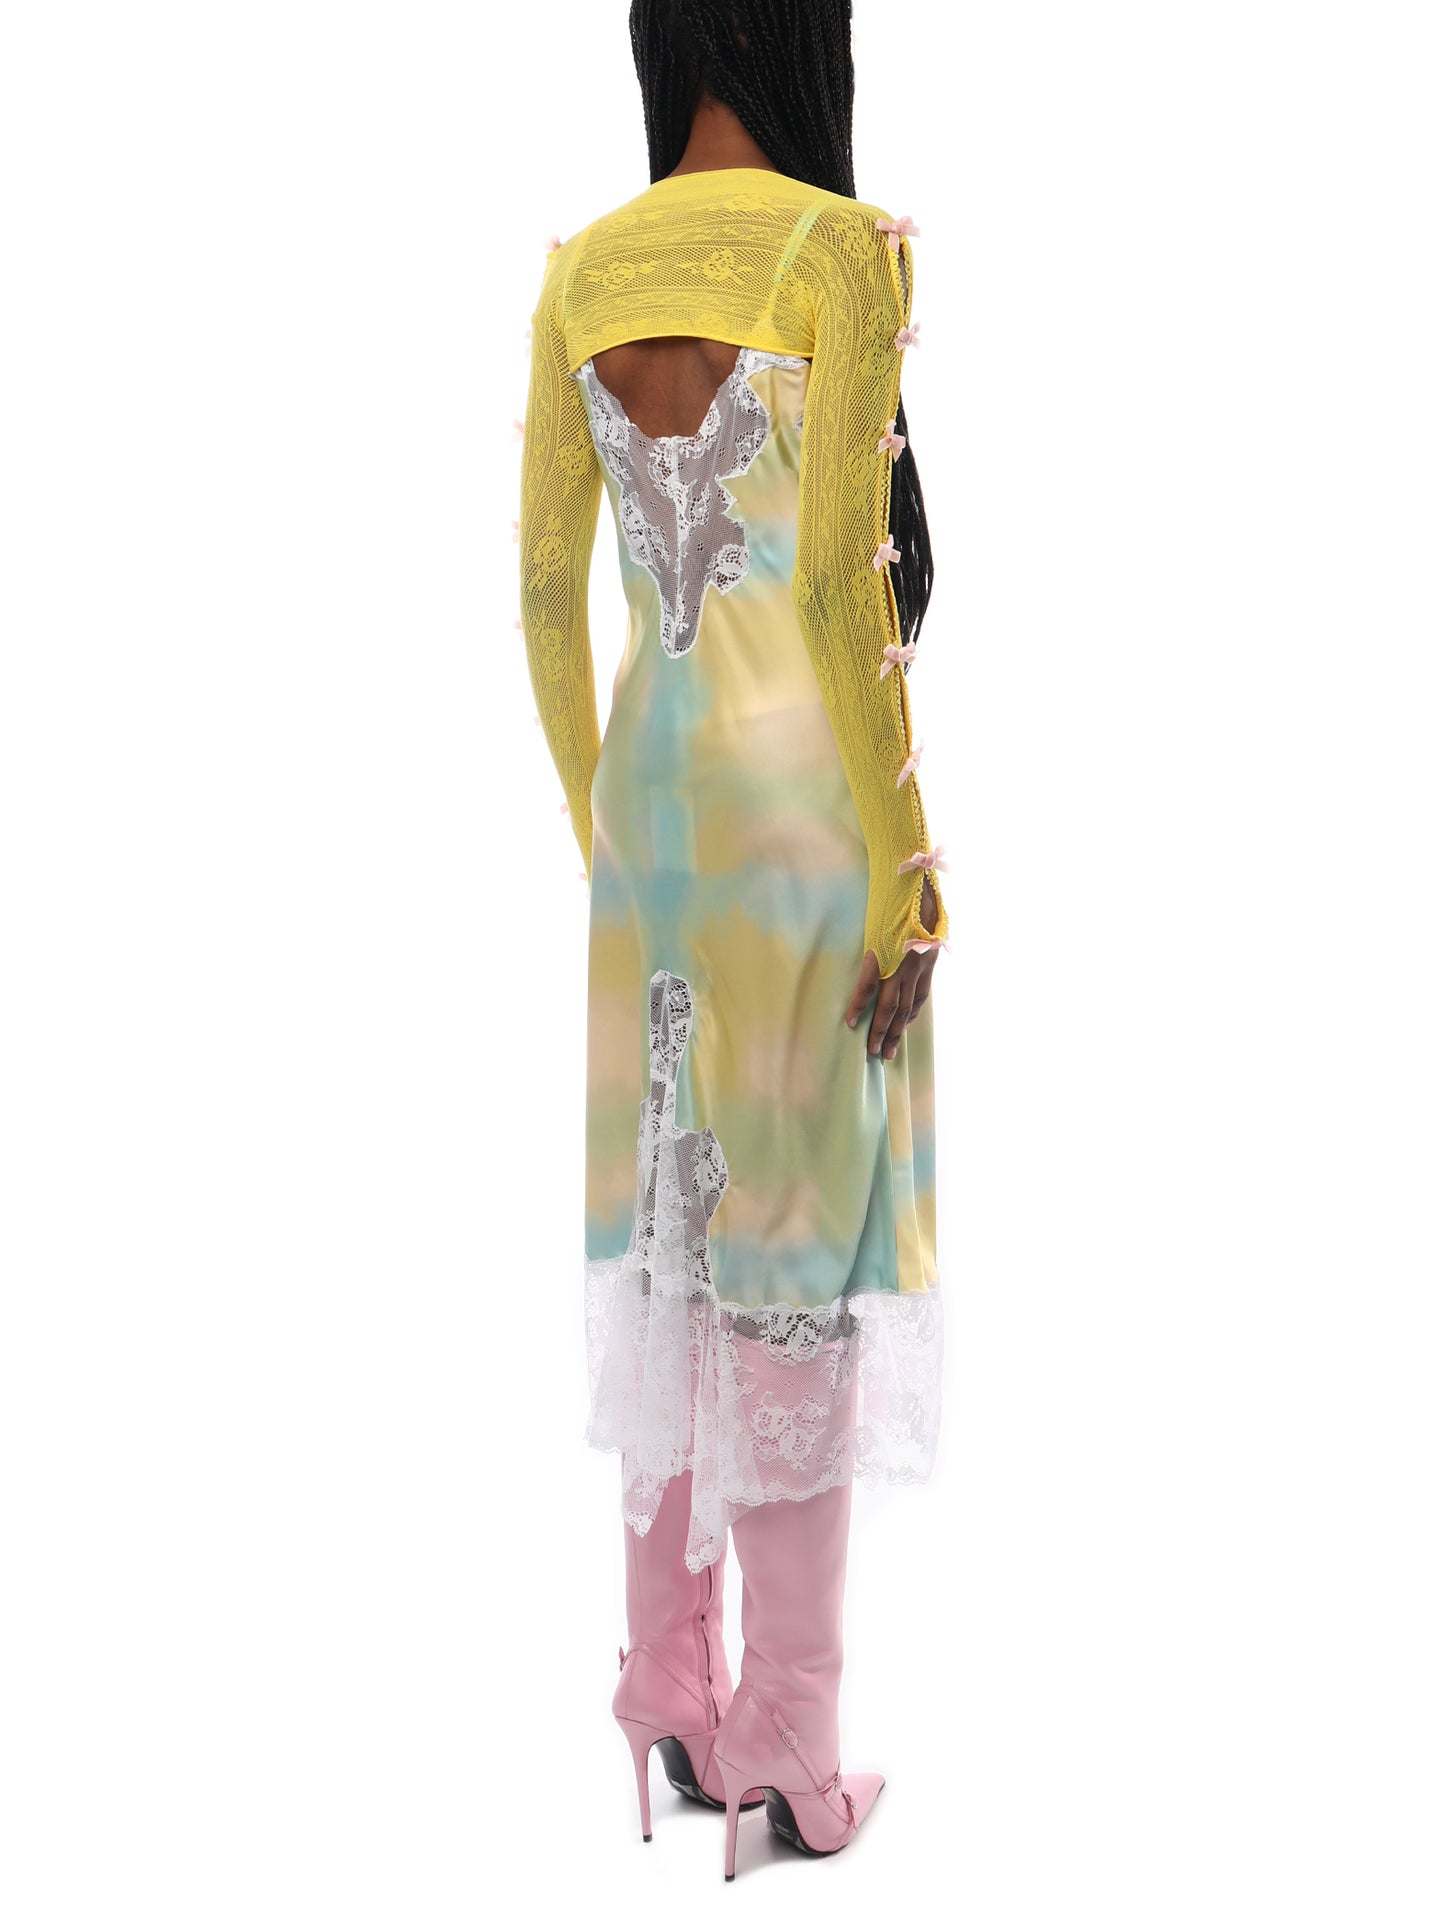 Nodress Yellow Lace Sleeve with Pink Bows